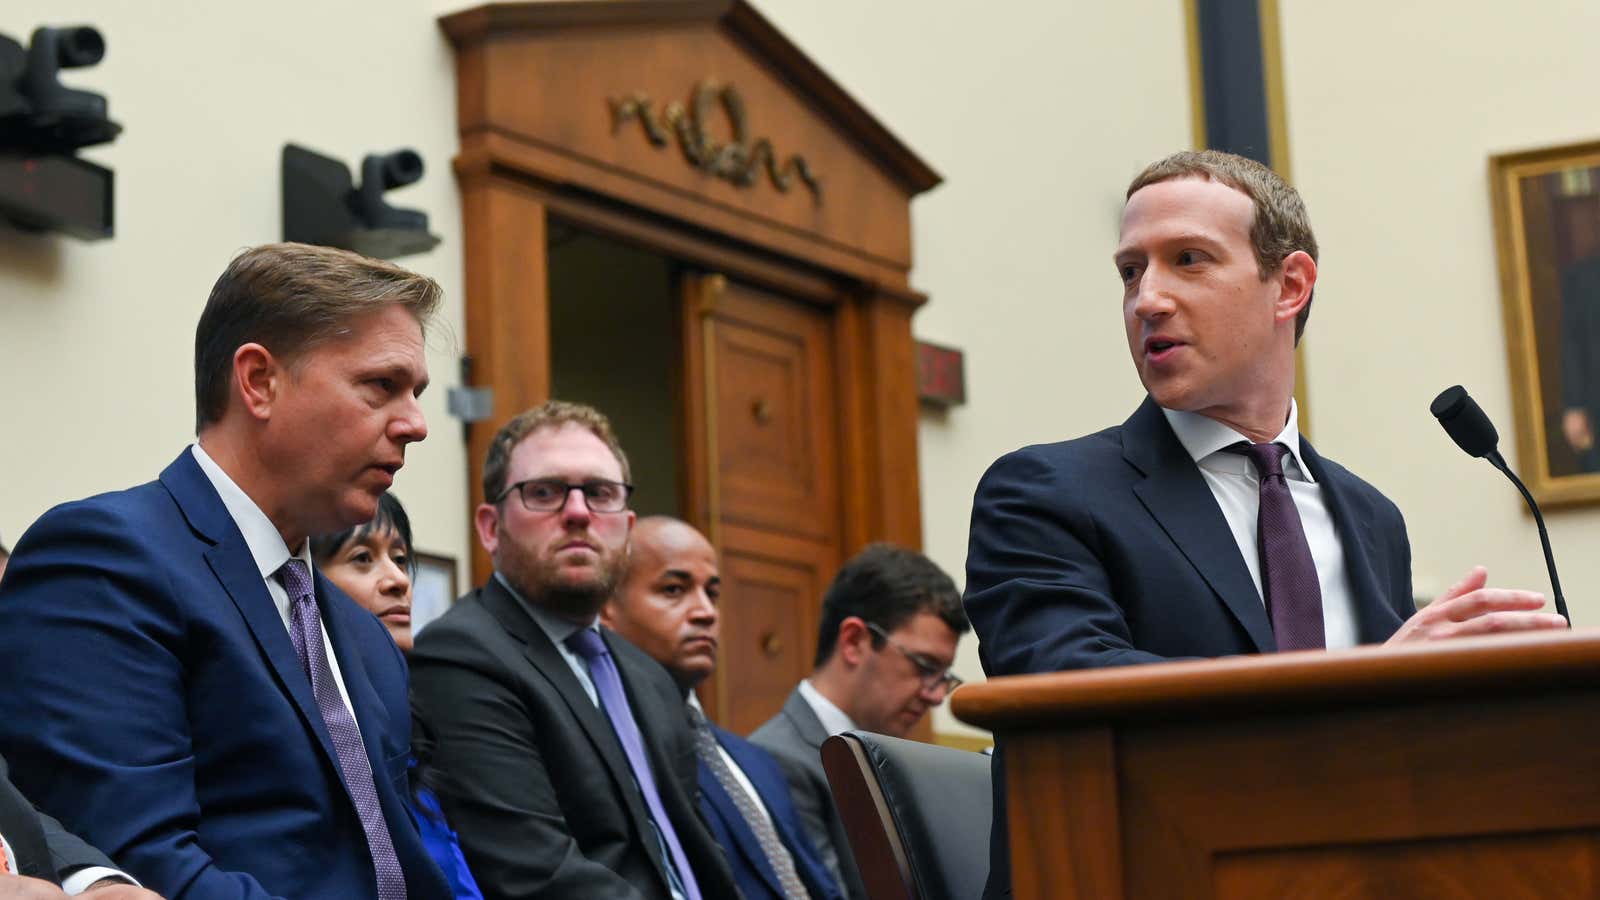 Facebook Chairman and CEO Mark Zuckerberg consults with his legal team as he testifies at a House Financial Services Committee hearing in Washington, U.S., October 23, 2019.